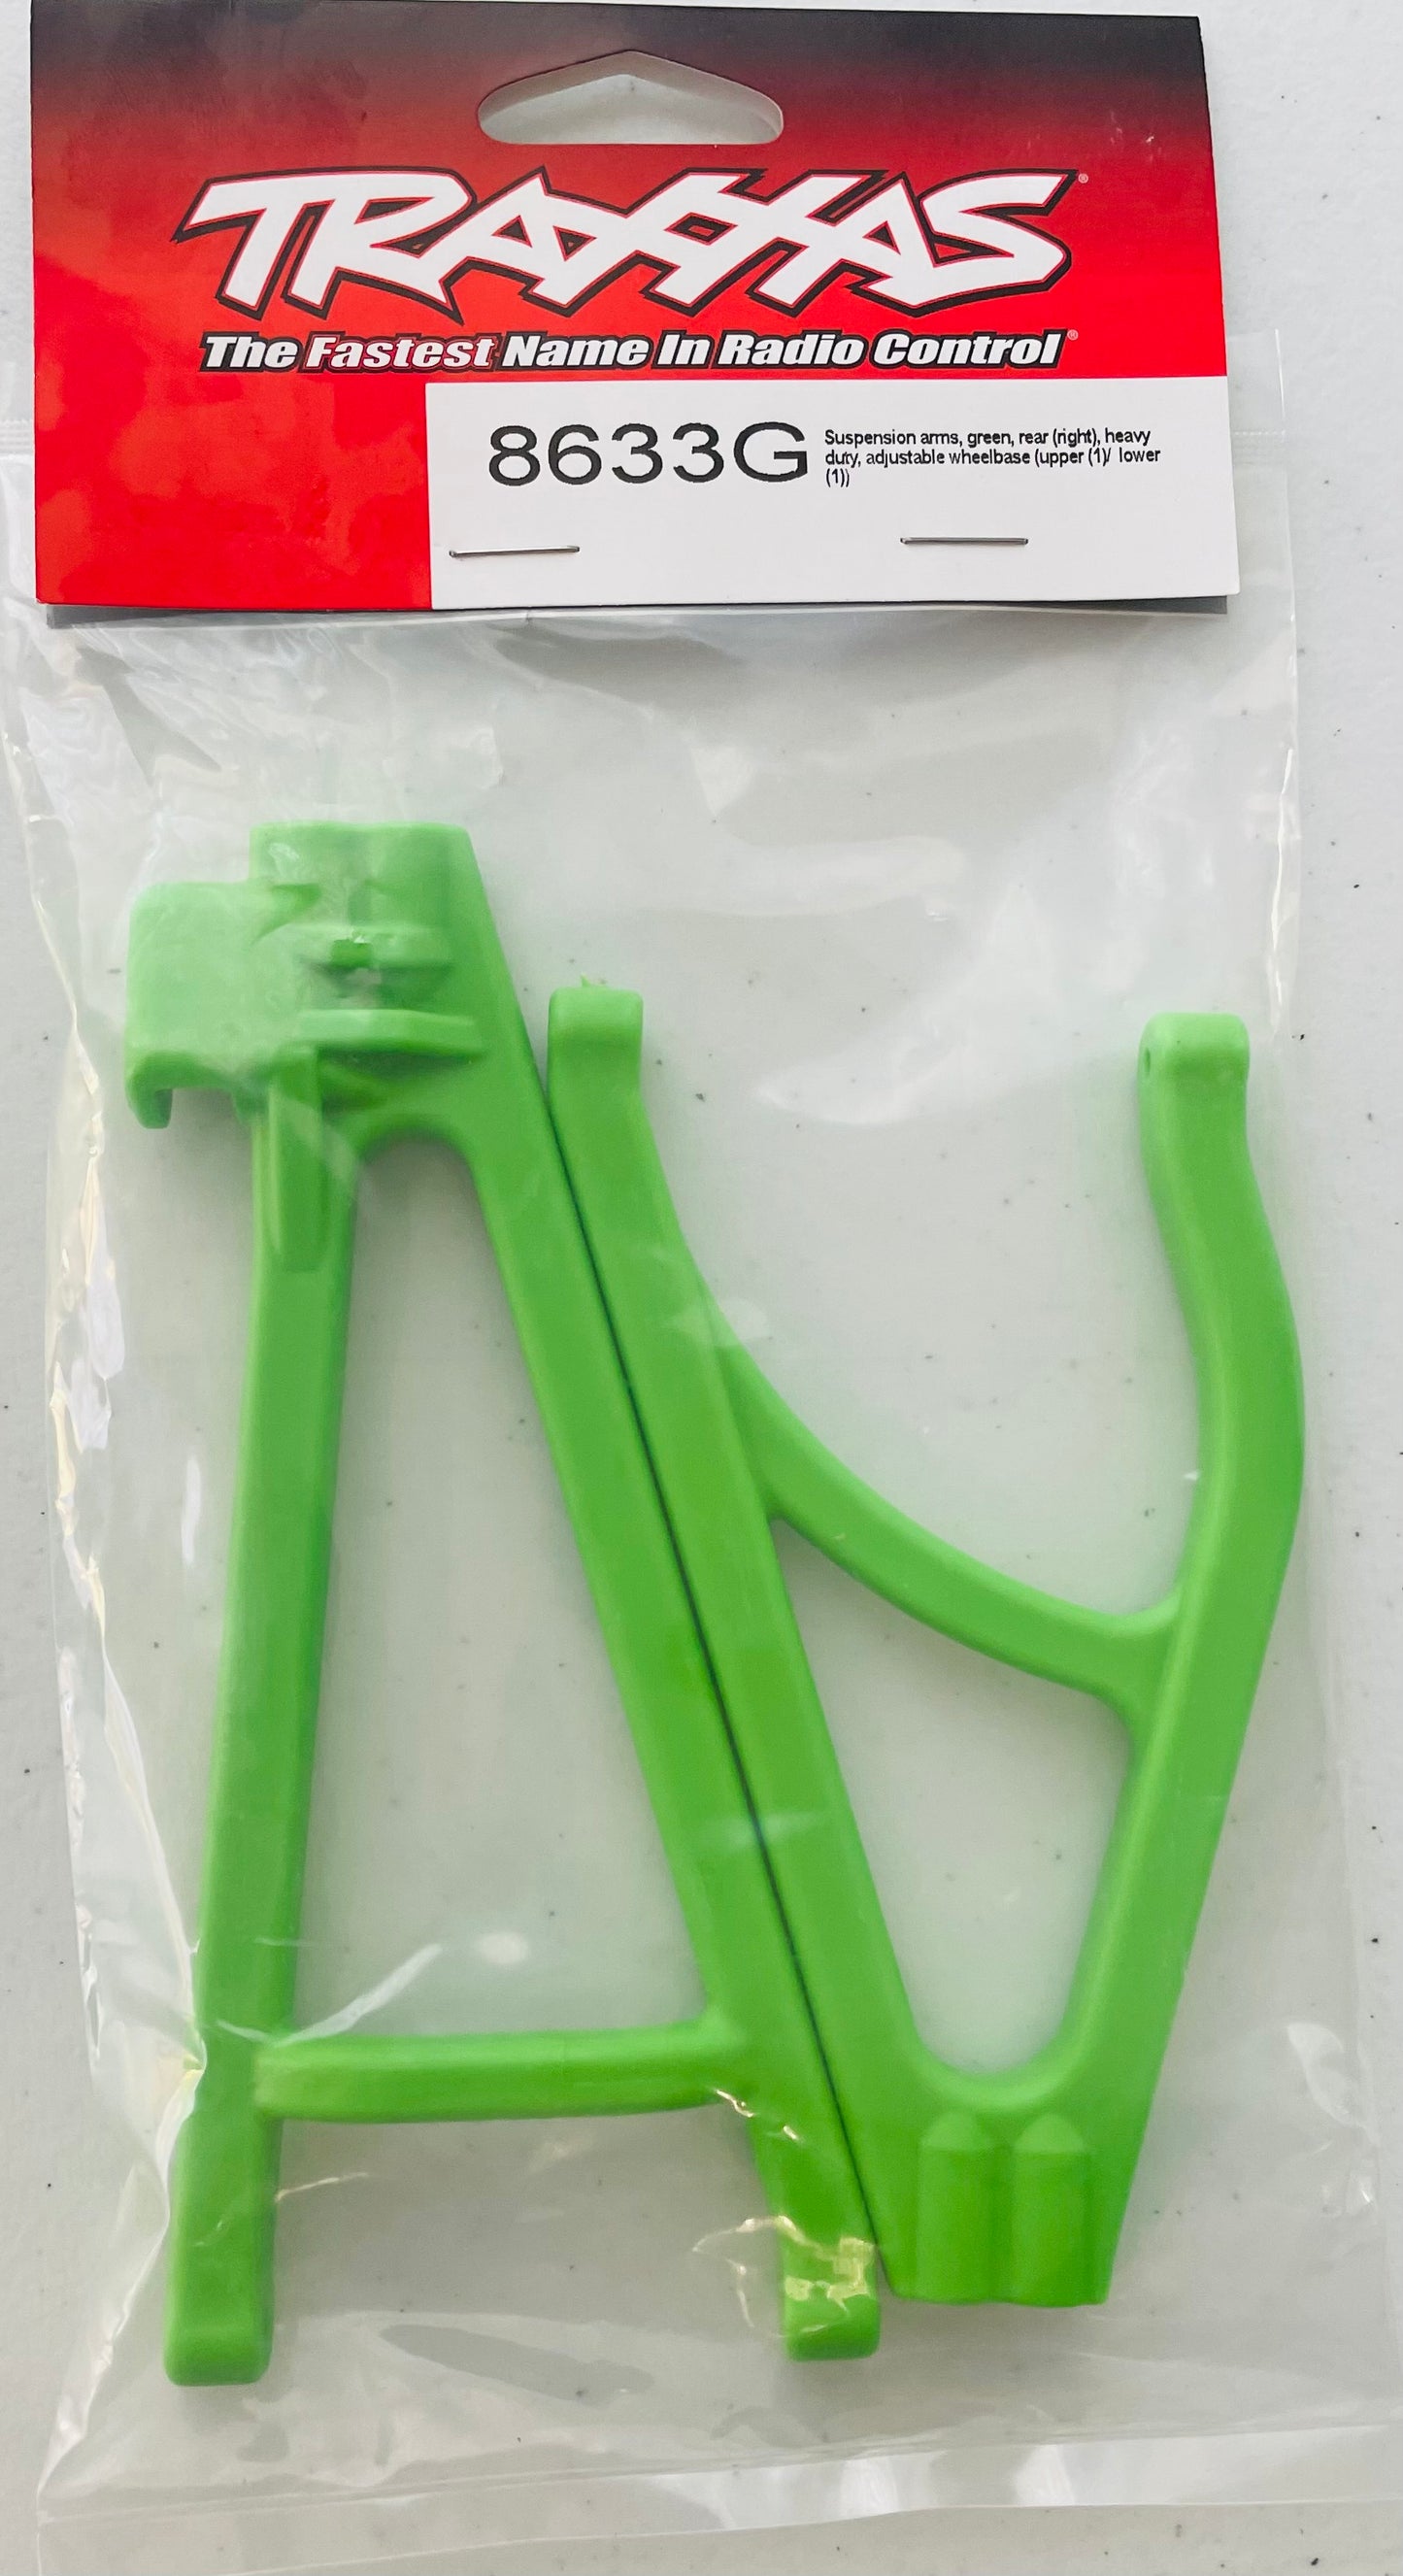 Traxxas Green Rear Upper and Lower Right Heavy Duty Suspension Arms #8633G